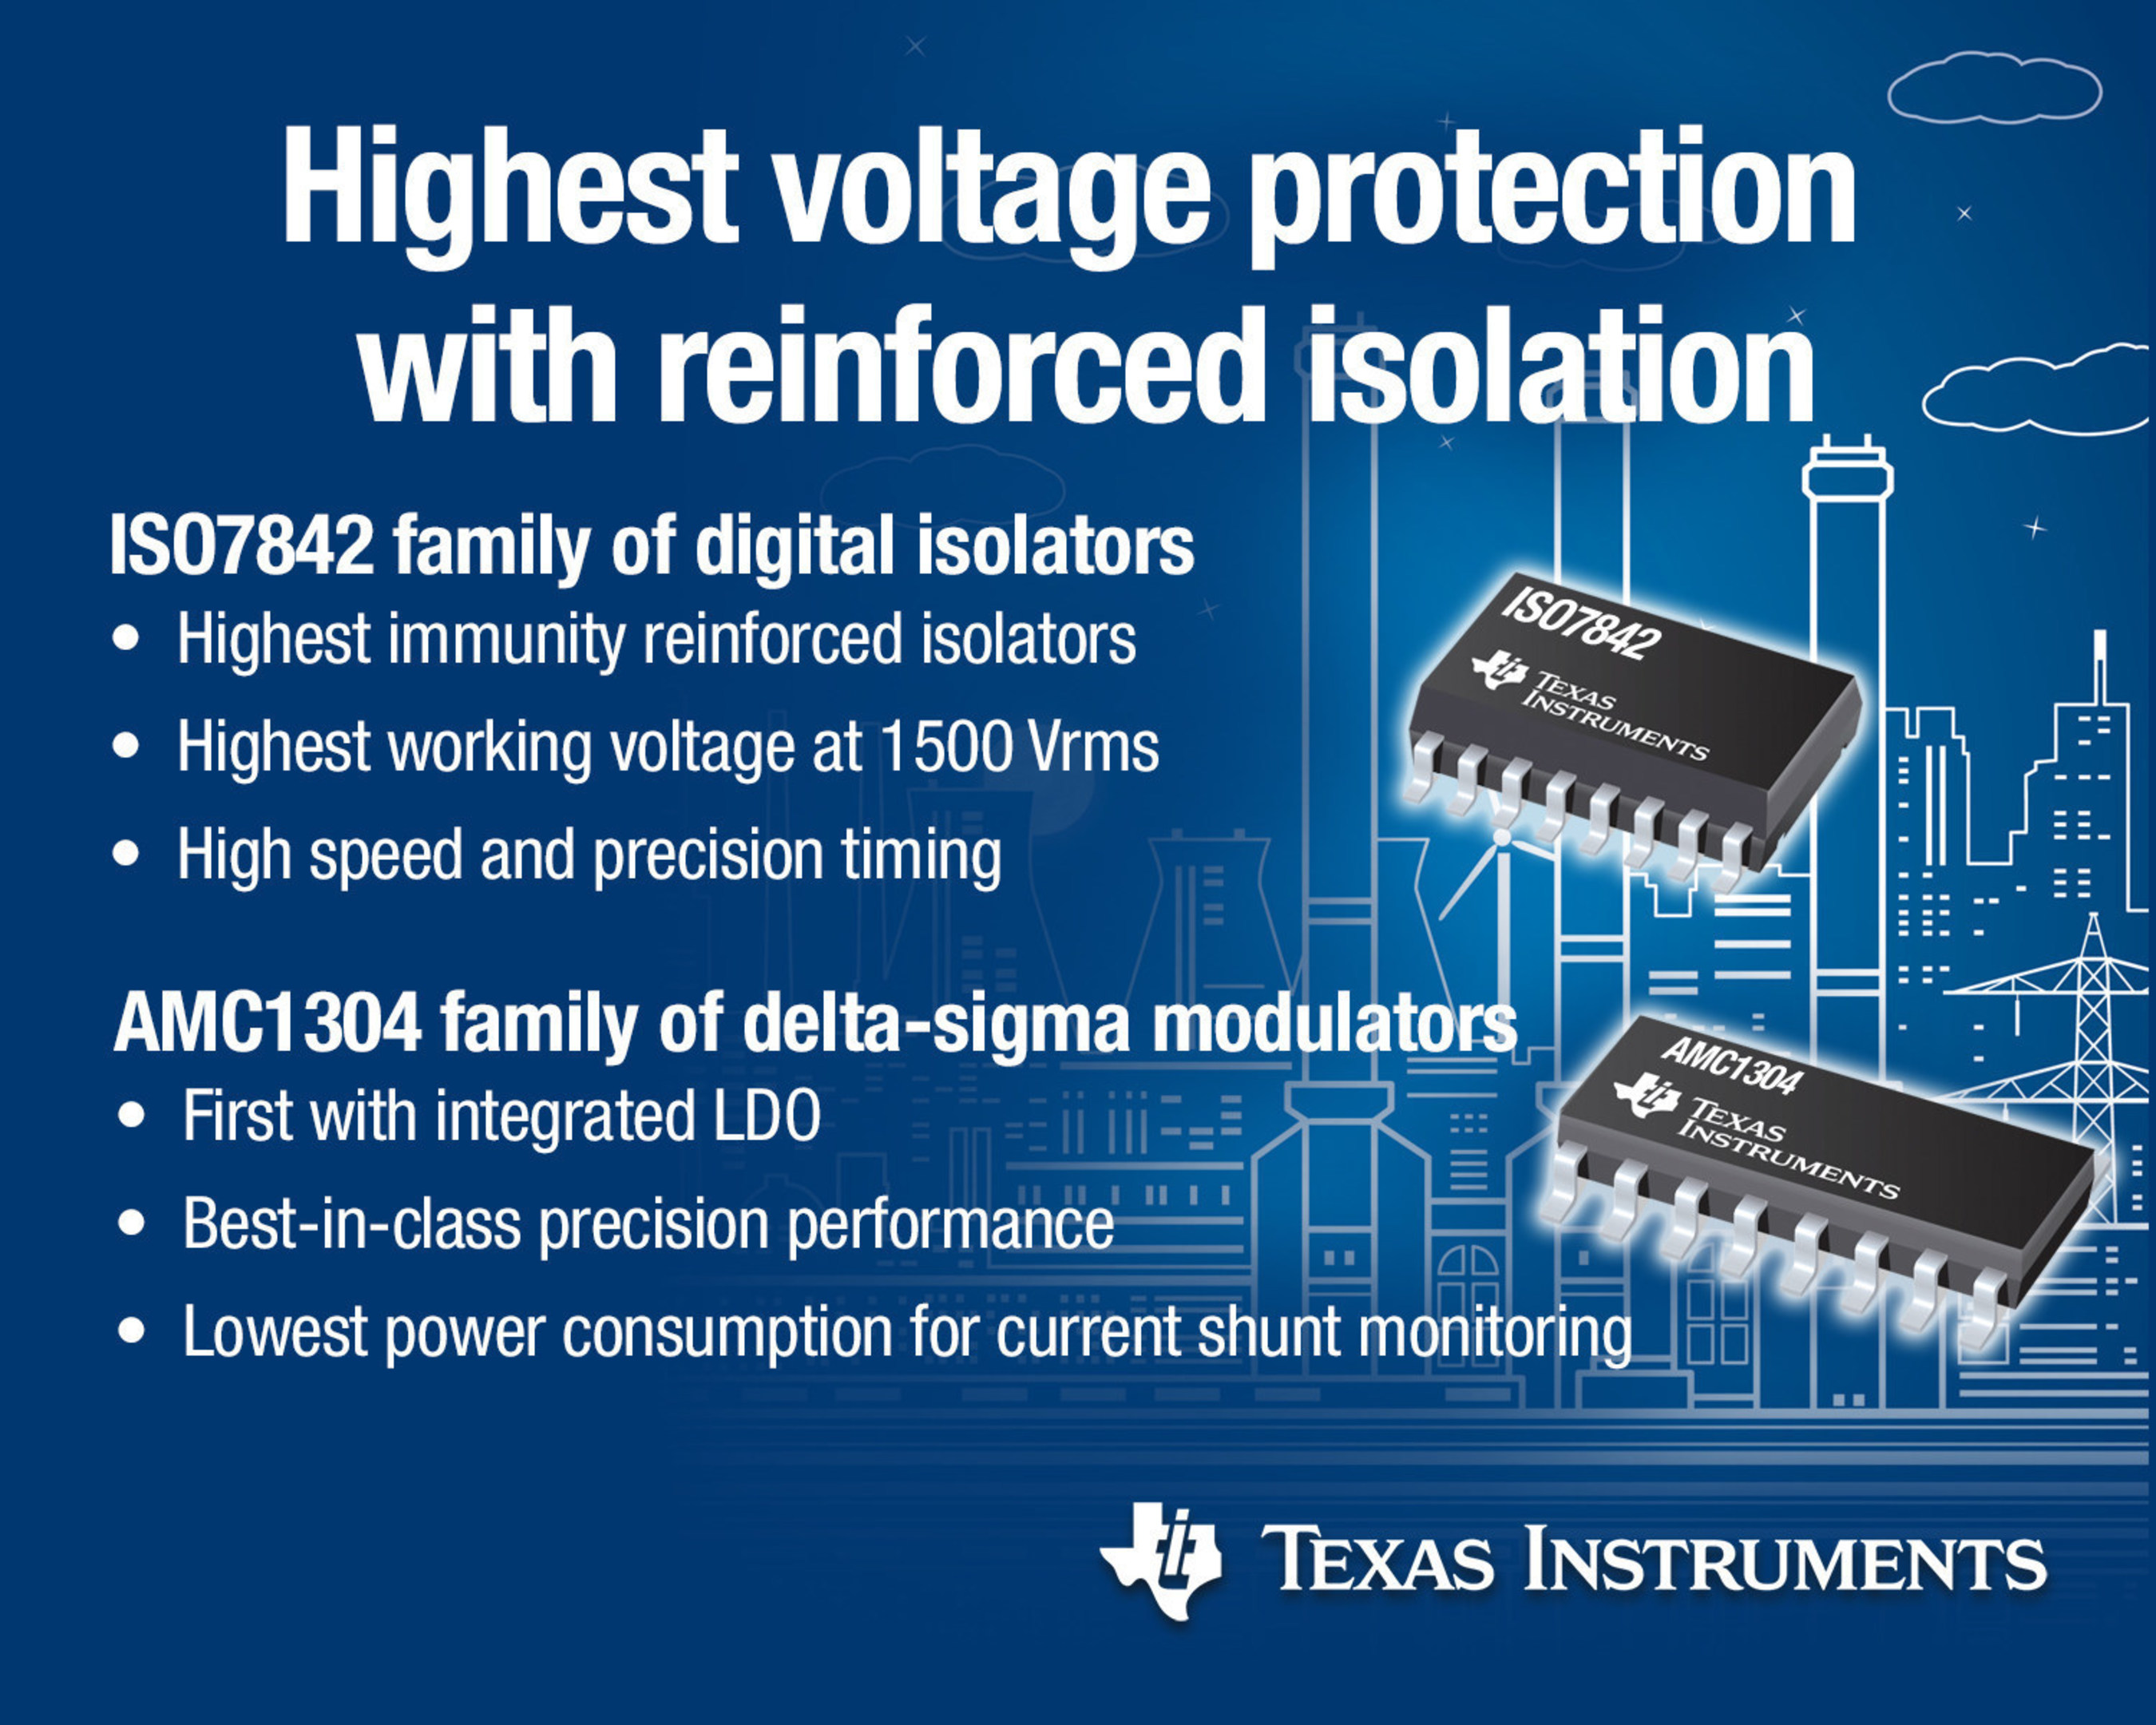 Texas Instruments (TI) today introduced digital isolation and delta-sigma modulator families that offer reinforced isolation to help protect electronic equipment from high line voltages. The ISO7842 family provides the industry's highest immunity reinforced isolators and the first to withstand an isolation barrier with a working breakdown voltage of 1,500 Vrms for a minimum lifetime of 40 years. The AMC1304 delta-sigma modulator family offers best-in-class precision performance and the lowest power...